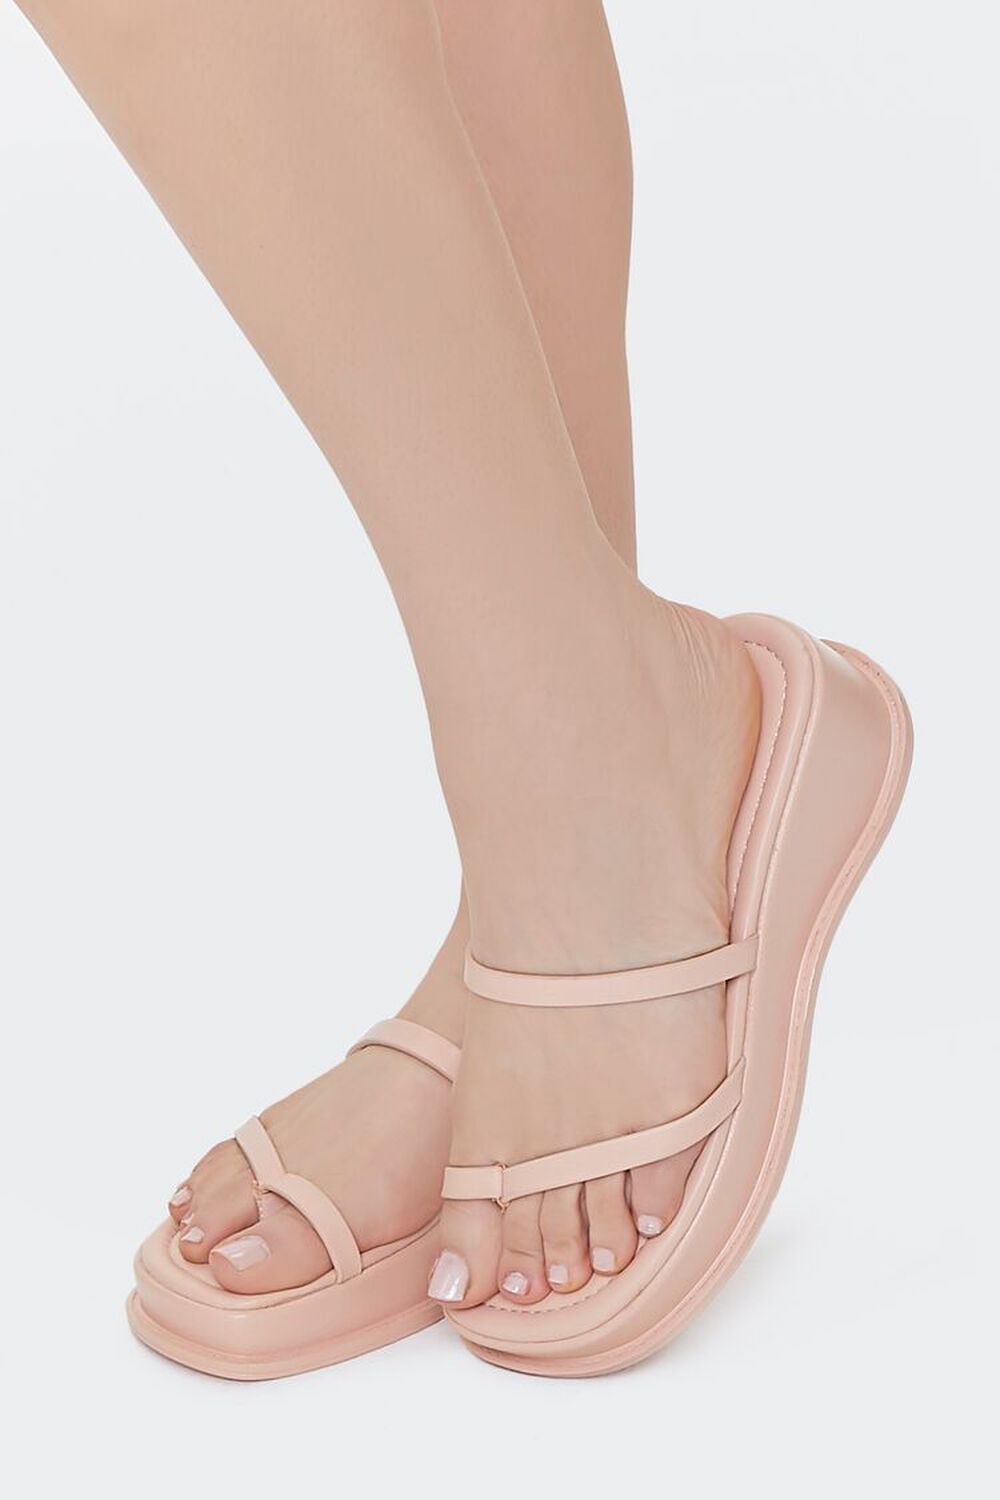 BLUSH Faux Leather Toe-Loop Wedges, image 1